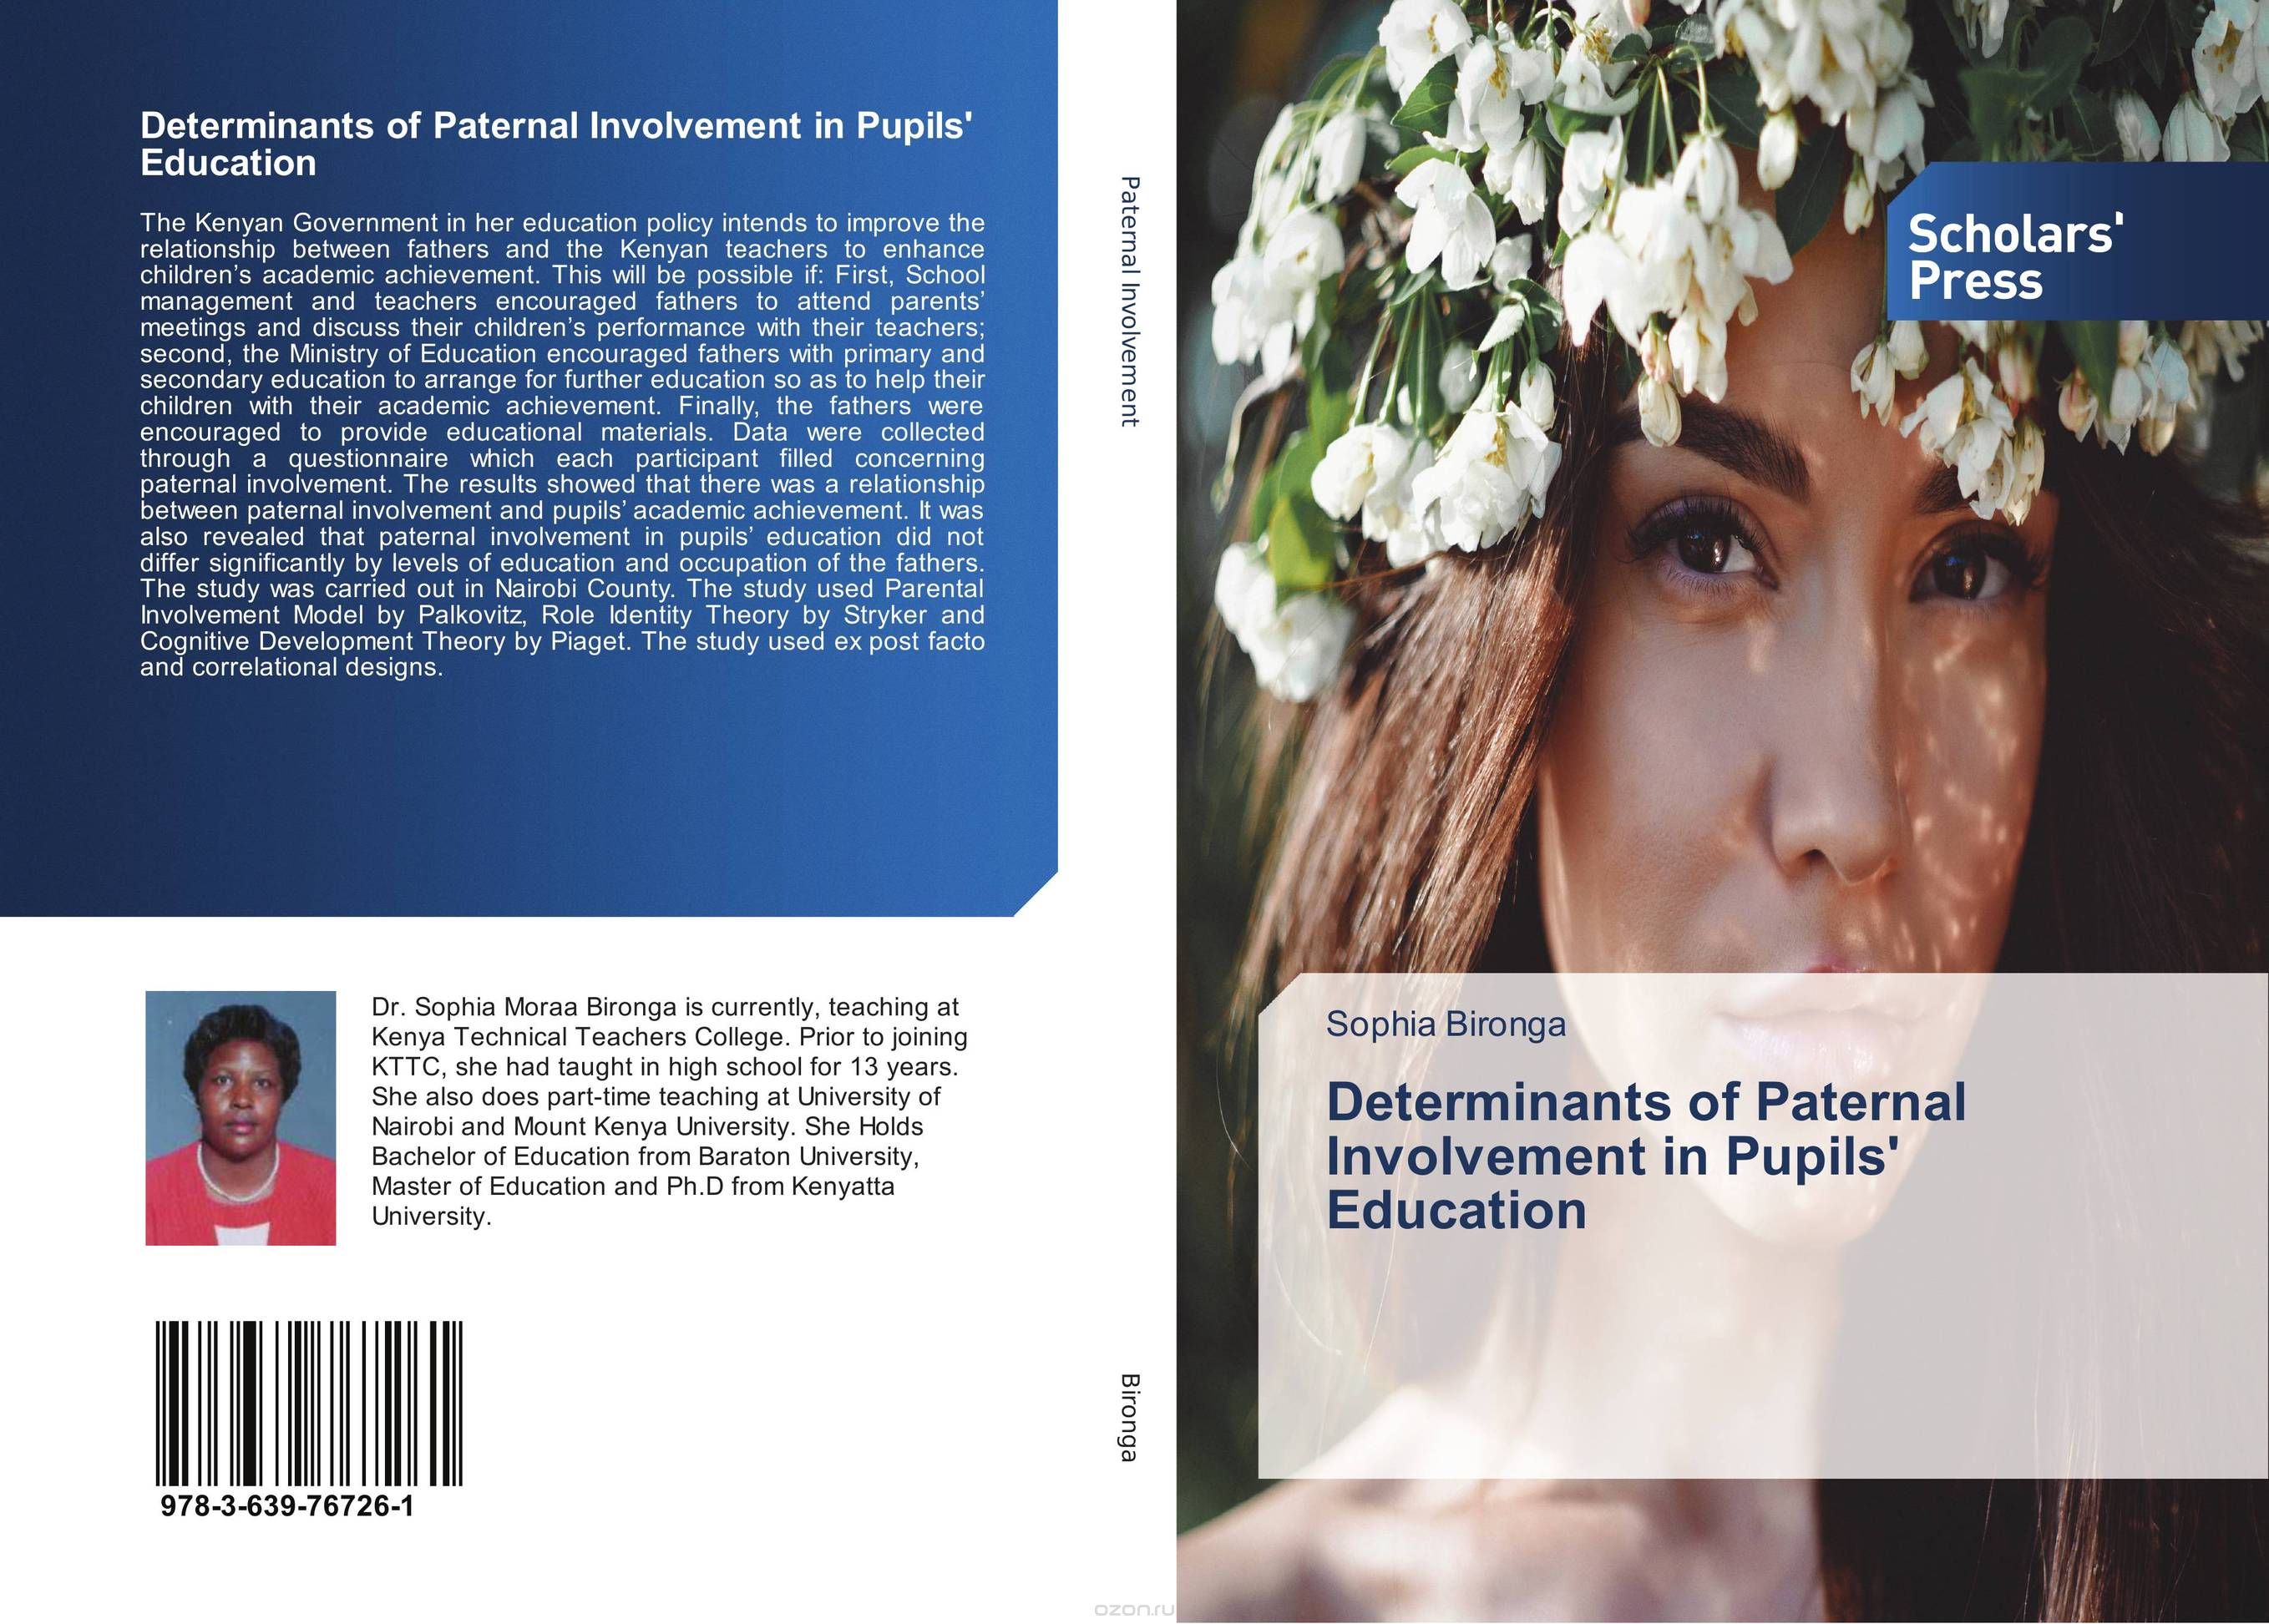 Determinants of Paternal Involvement in Pupils' Education